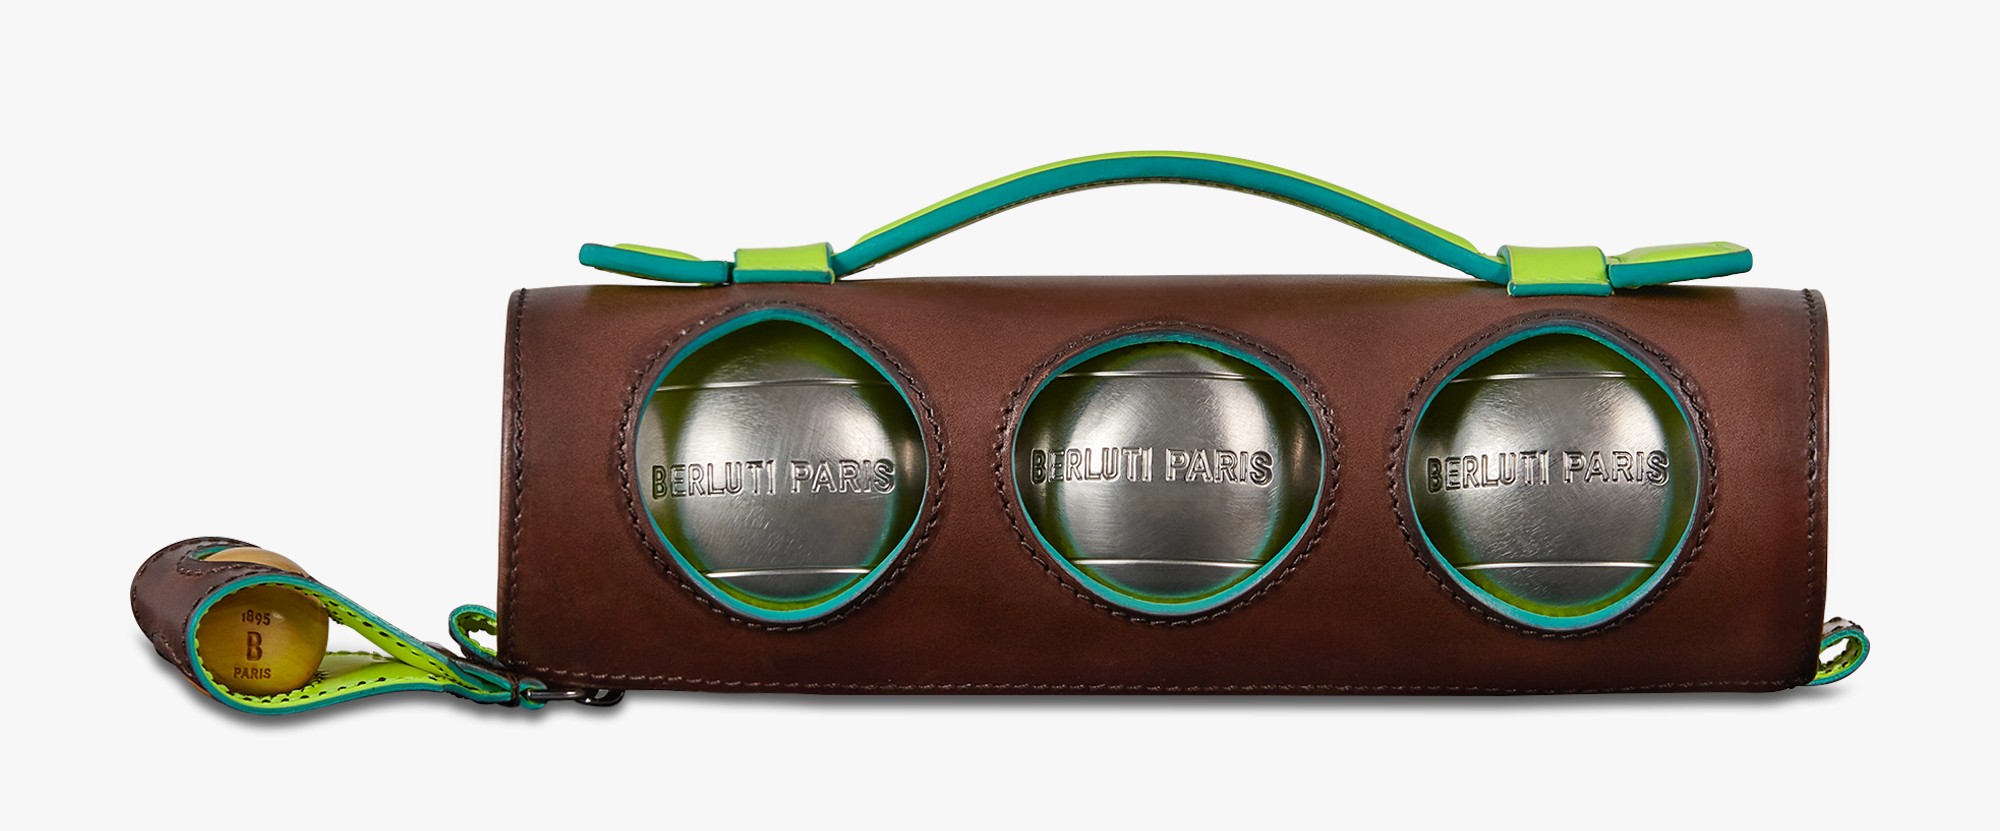 Berluti’s Pétanque case, containing France’s most traditional game, is great for sports lovers.